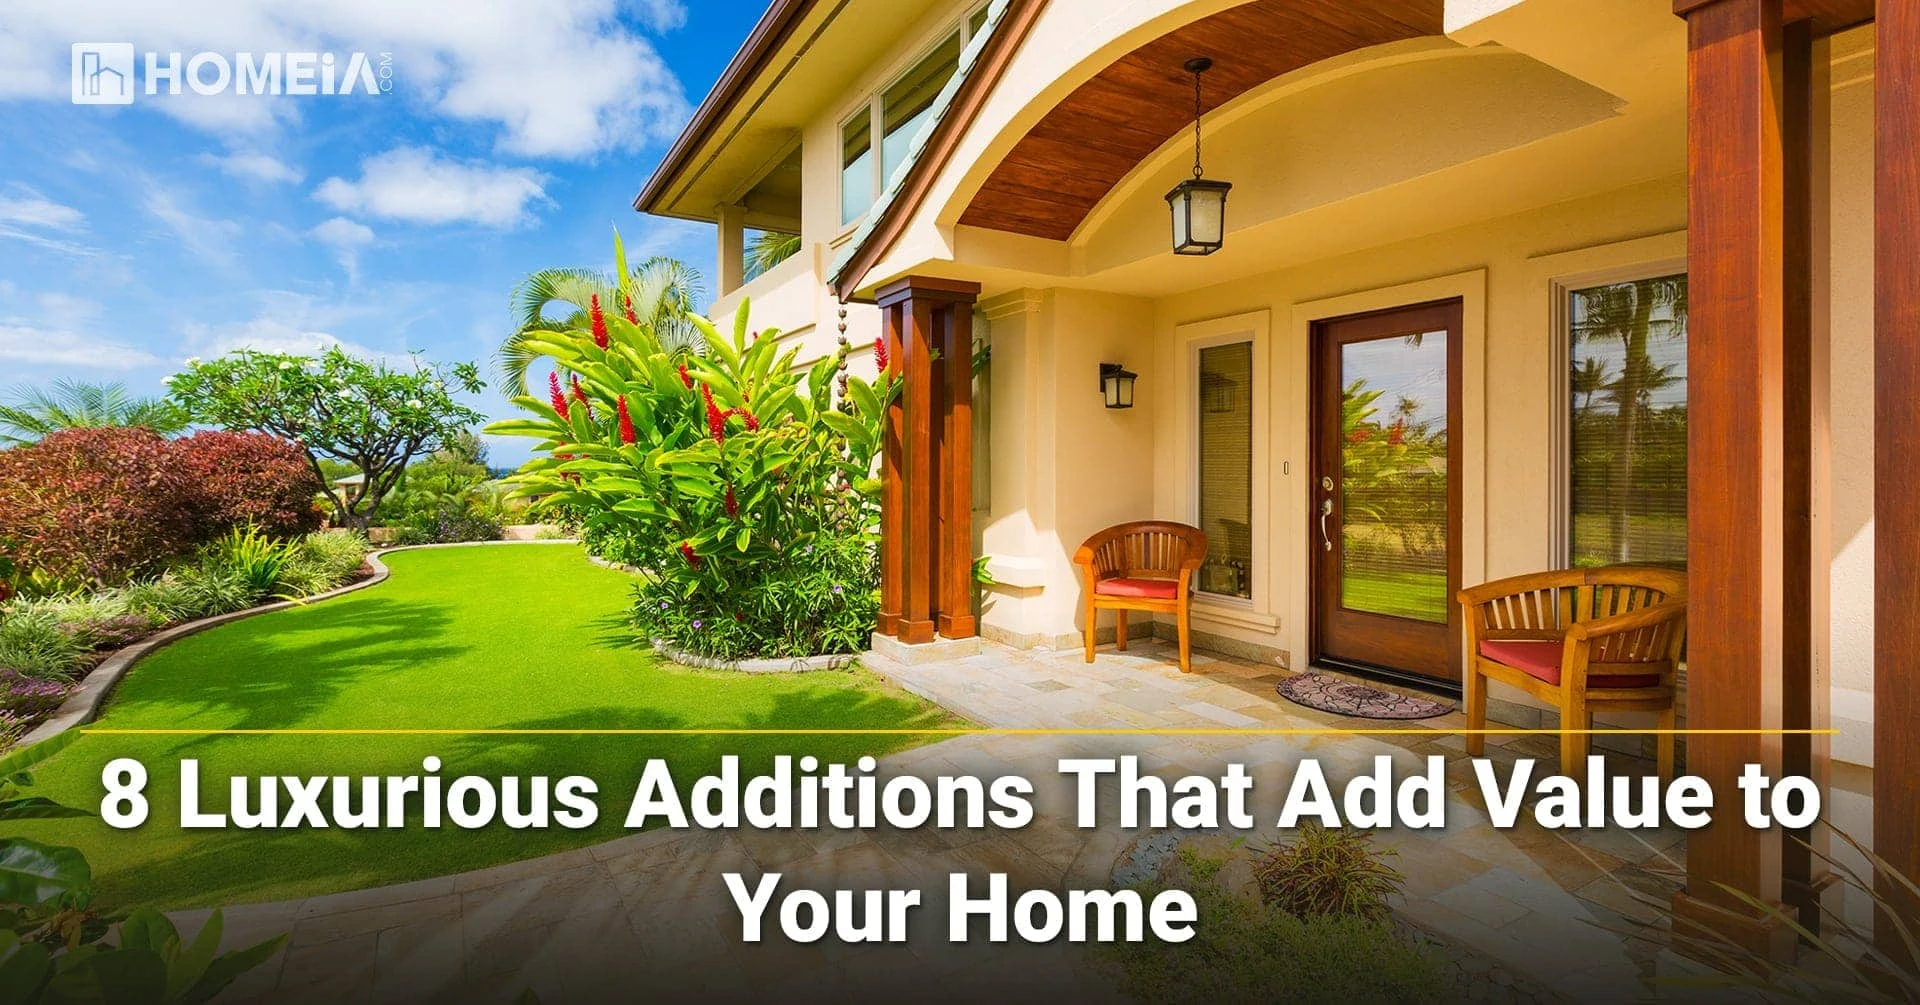 Luxurious Additions That Add Value to Your Home